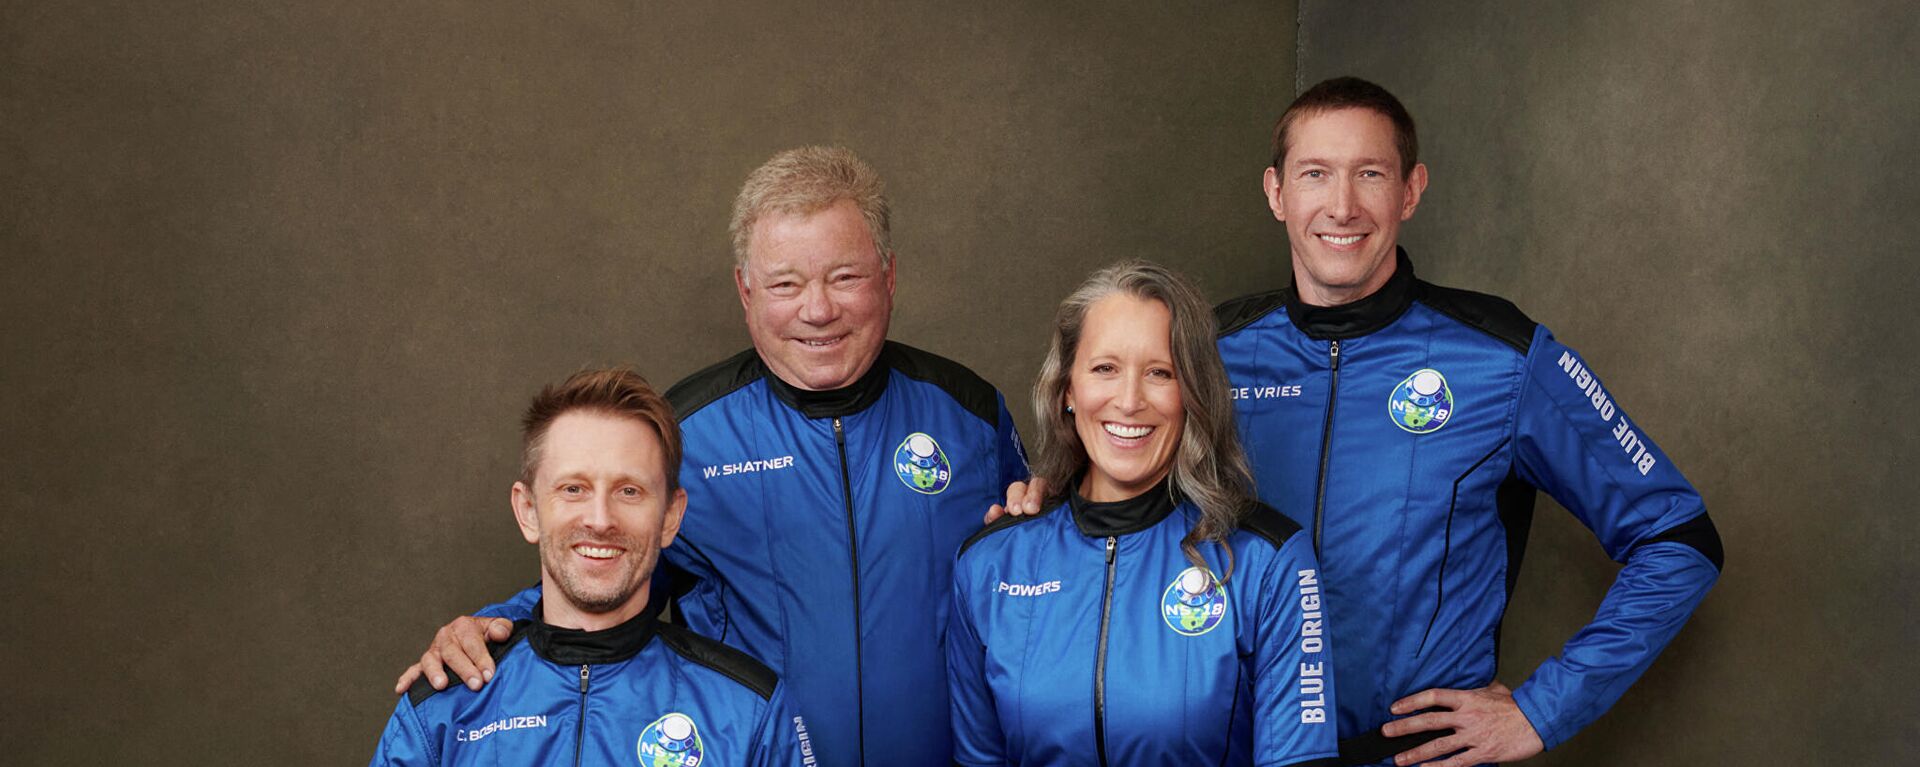 This handout photo released by Blue Origin Media shows the four member Blue Origin crew (from R) Glen de Vries, Audrey Powers, Canadian actor William Shatner and Chris Boshuizen posing at an undisclosed location on October 10, 2021. - Blue Origin announced on October 10 that it was delaying its flight set to carry actor William Shatner to space due to anticipated winds. - Sputnik International, 1920, 13.10.2021